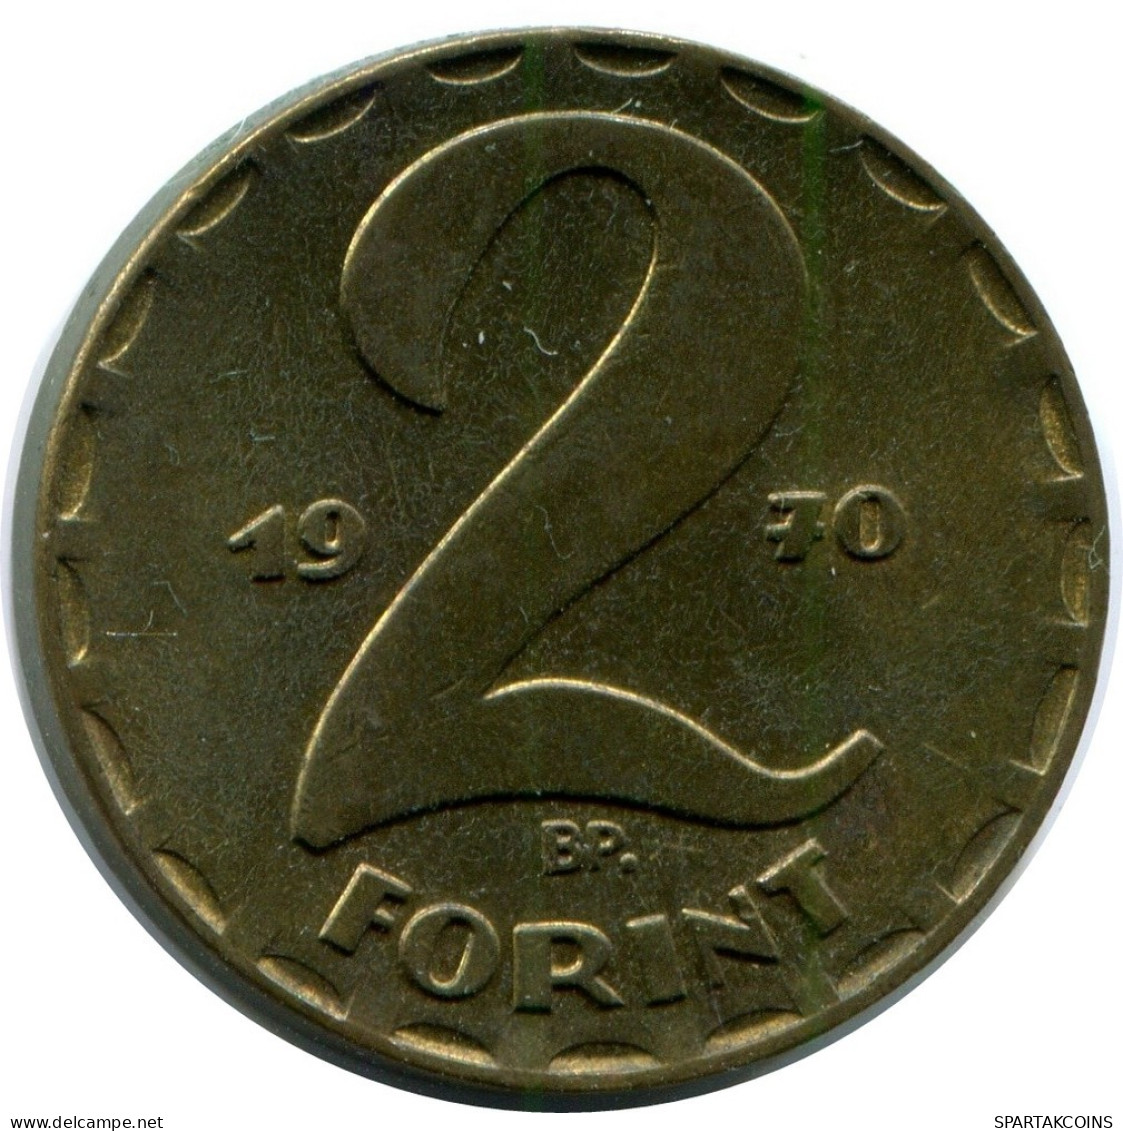 2 FORINT 1970 HUNGARY Coin #AY636.U.A - Ungheria